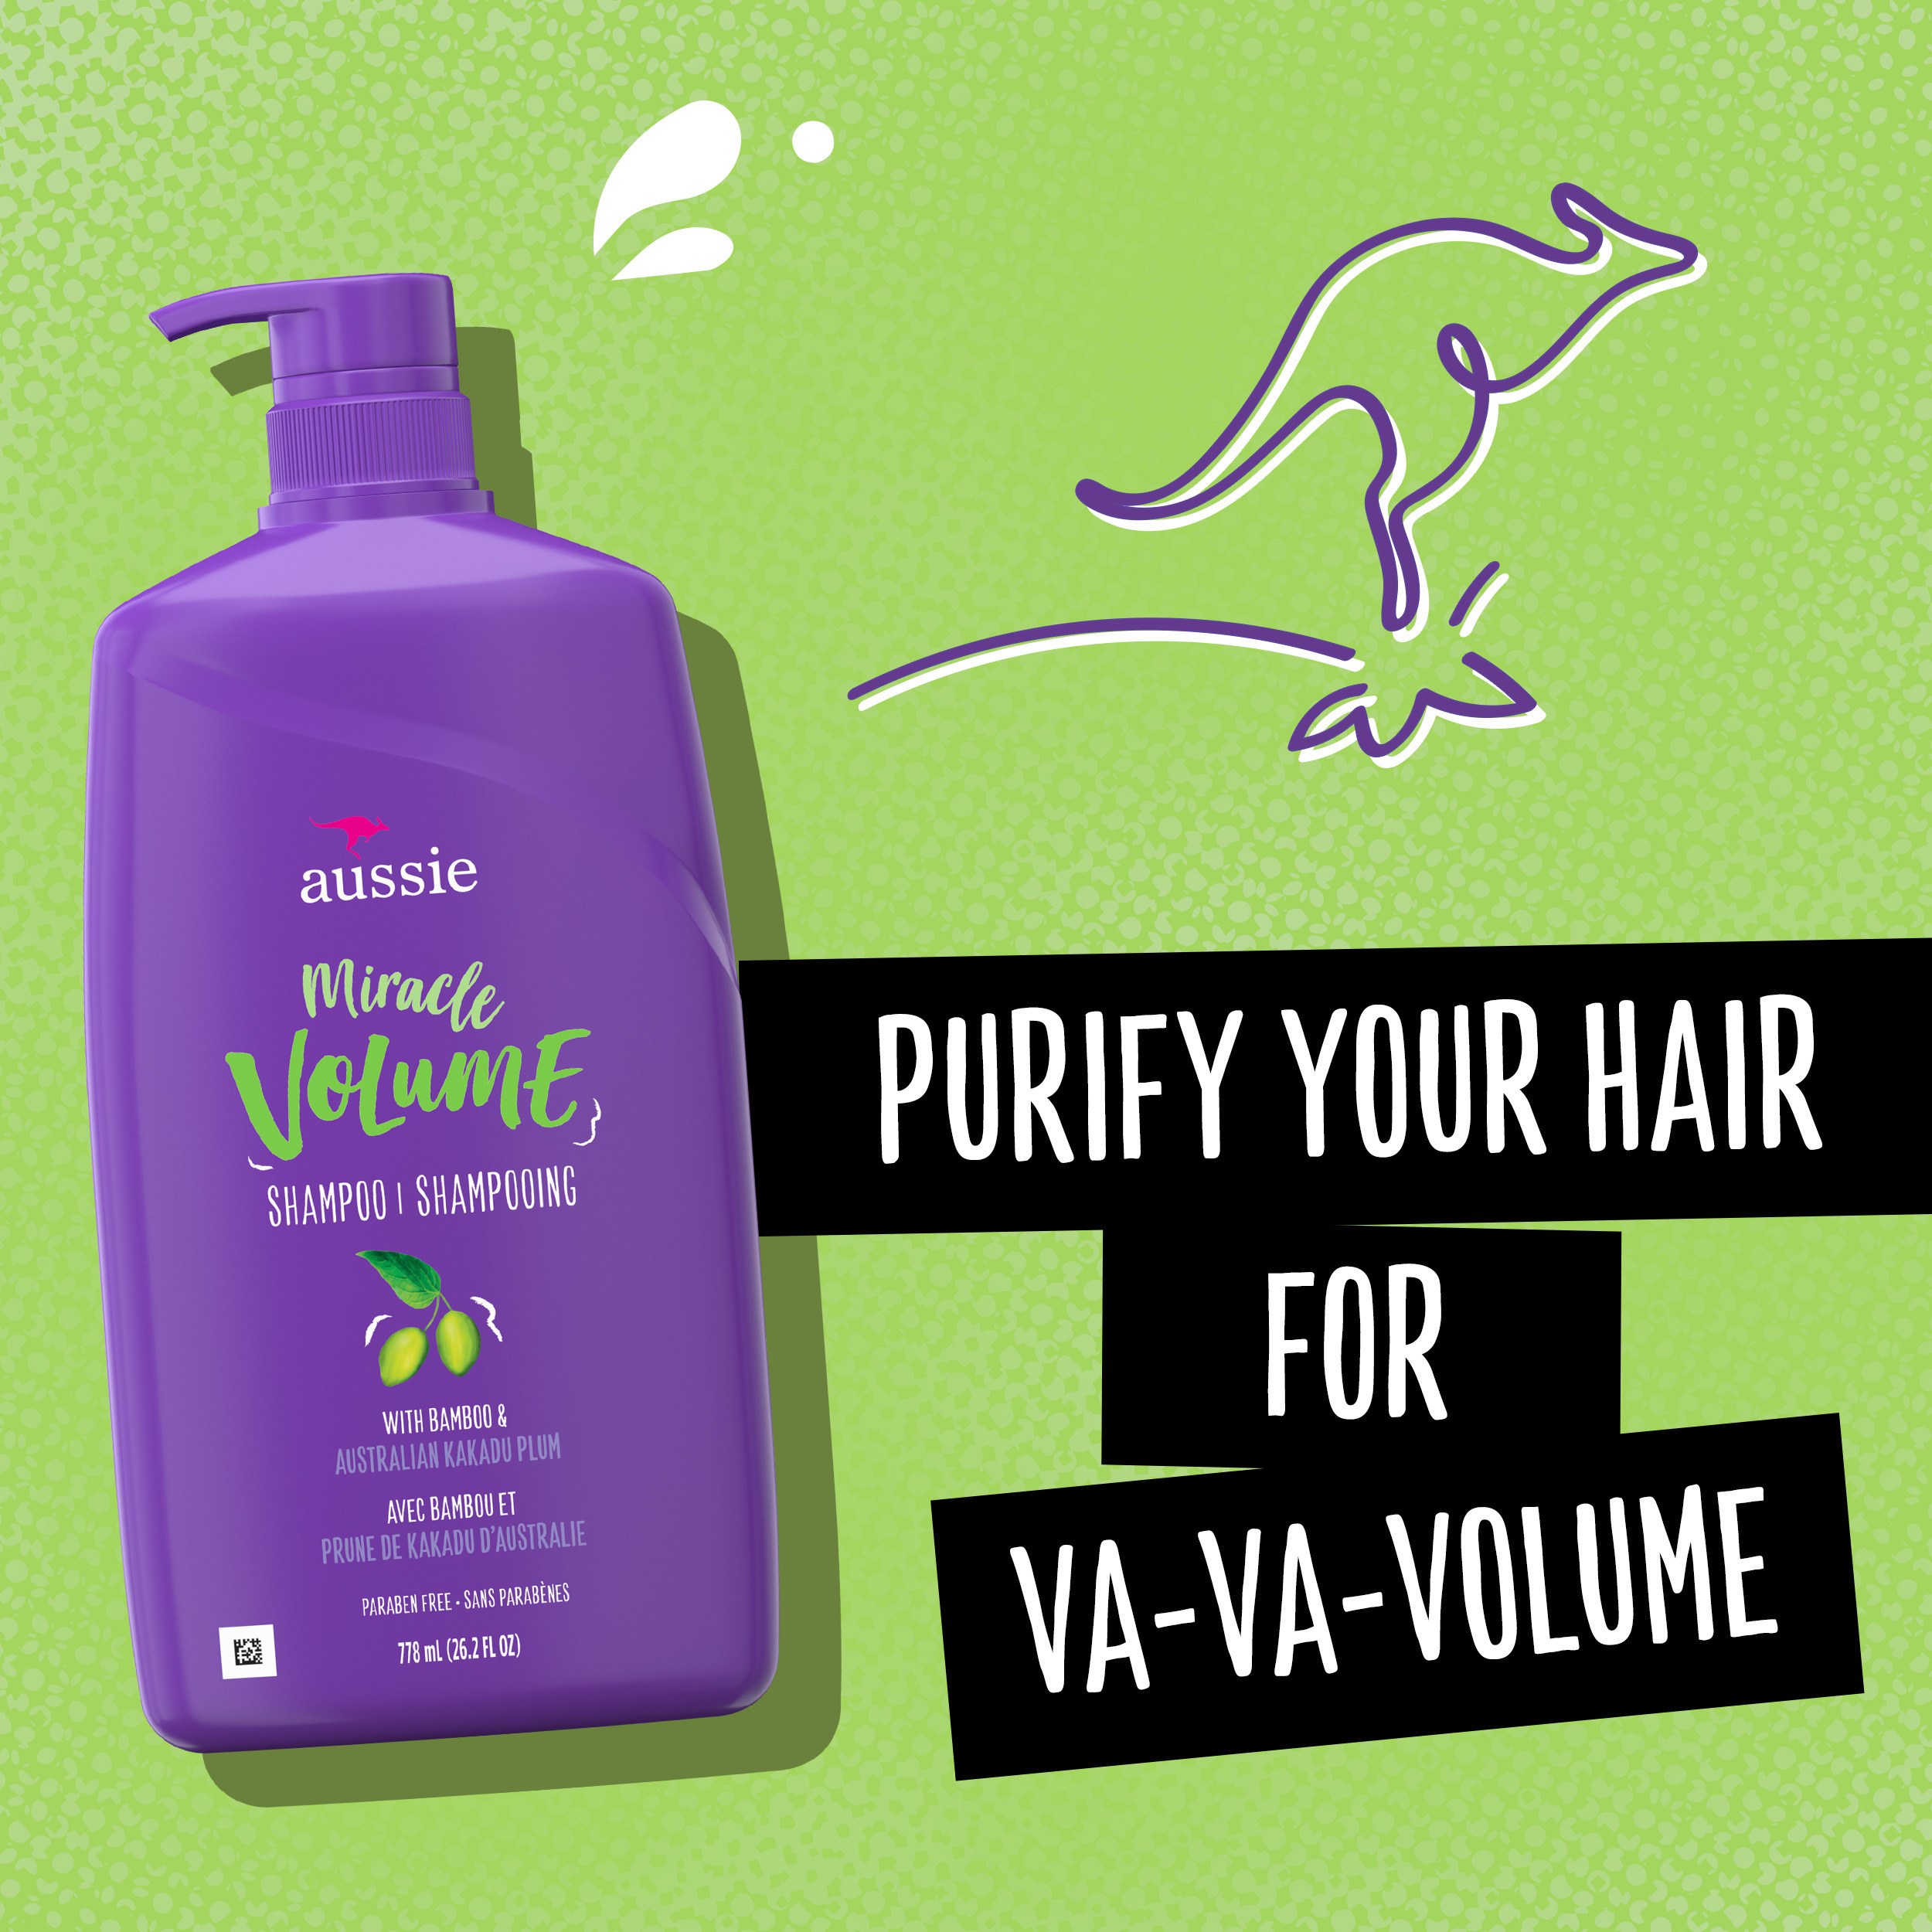 Aussie Miracle Volume with Plum & Bamboo, Paraben Free Shampoo, 26.2 fl oz - image 3 of 10